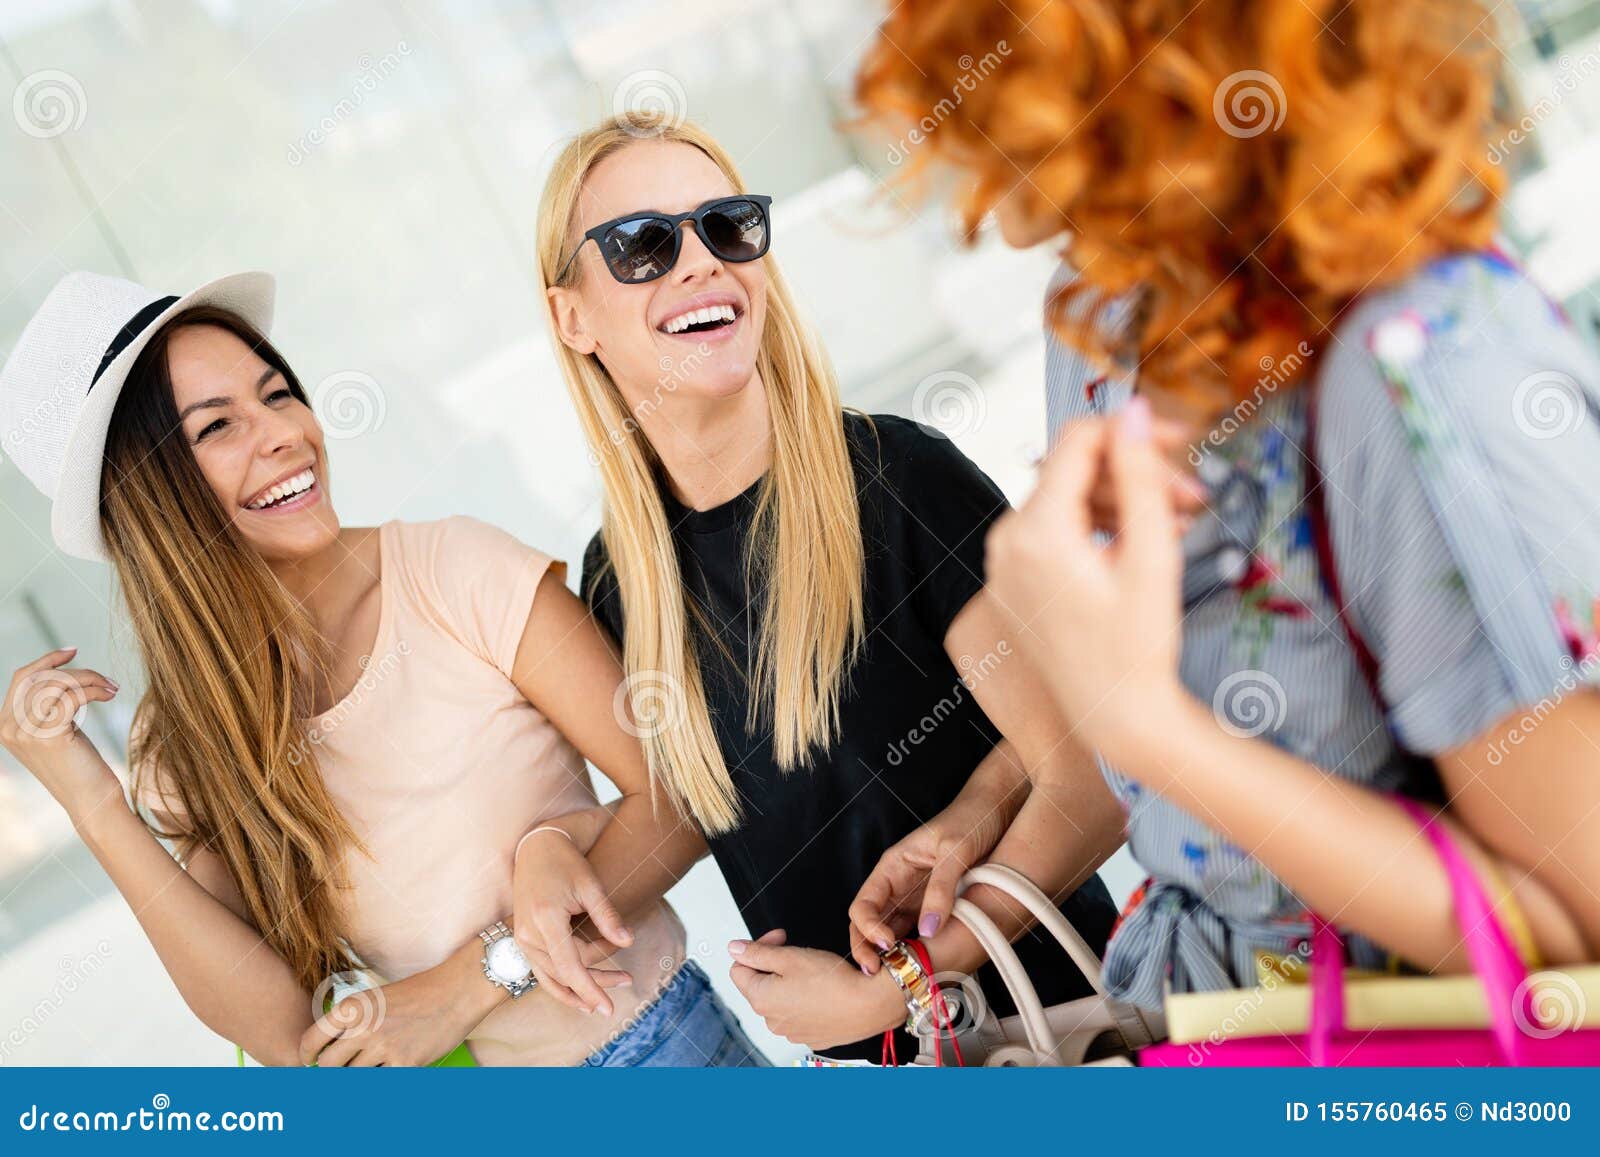 Group of Beautiful Women Smiling and Having Fun Together Stock Image ...